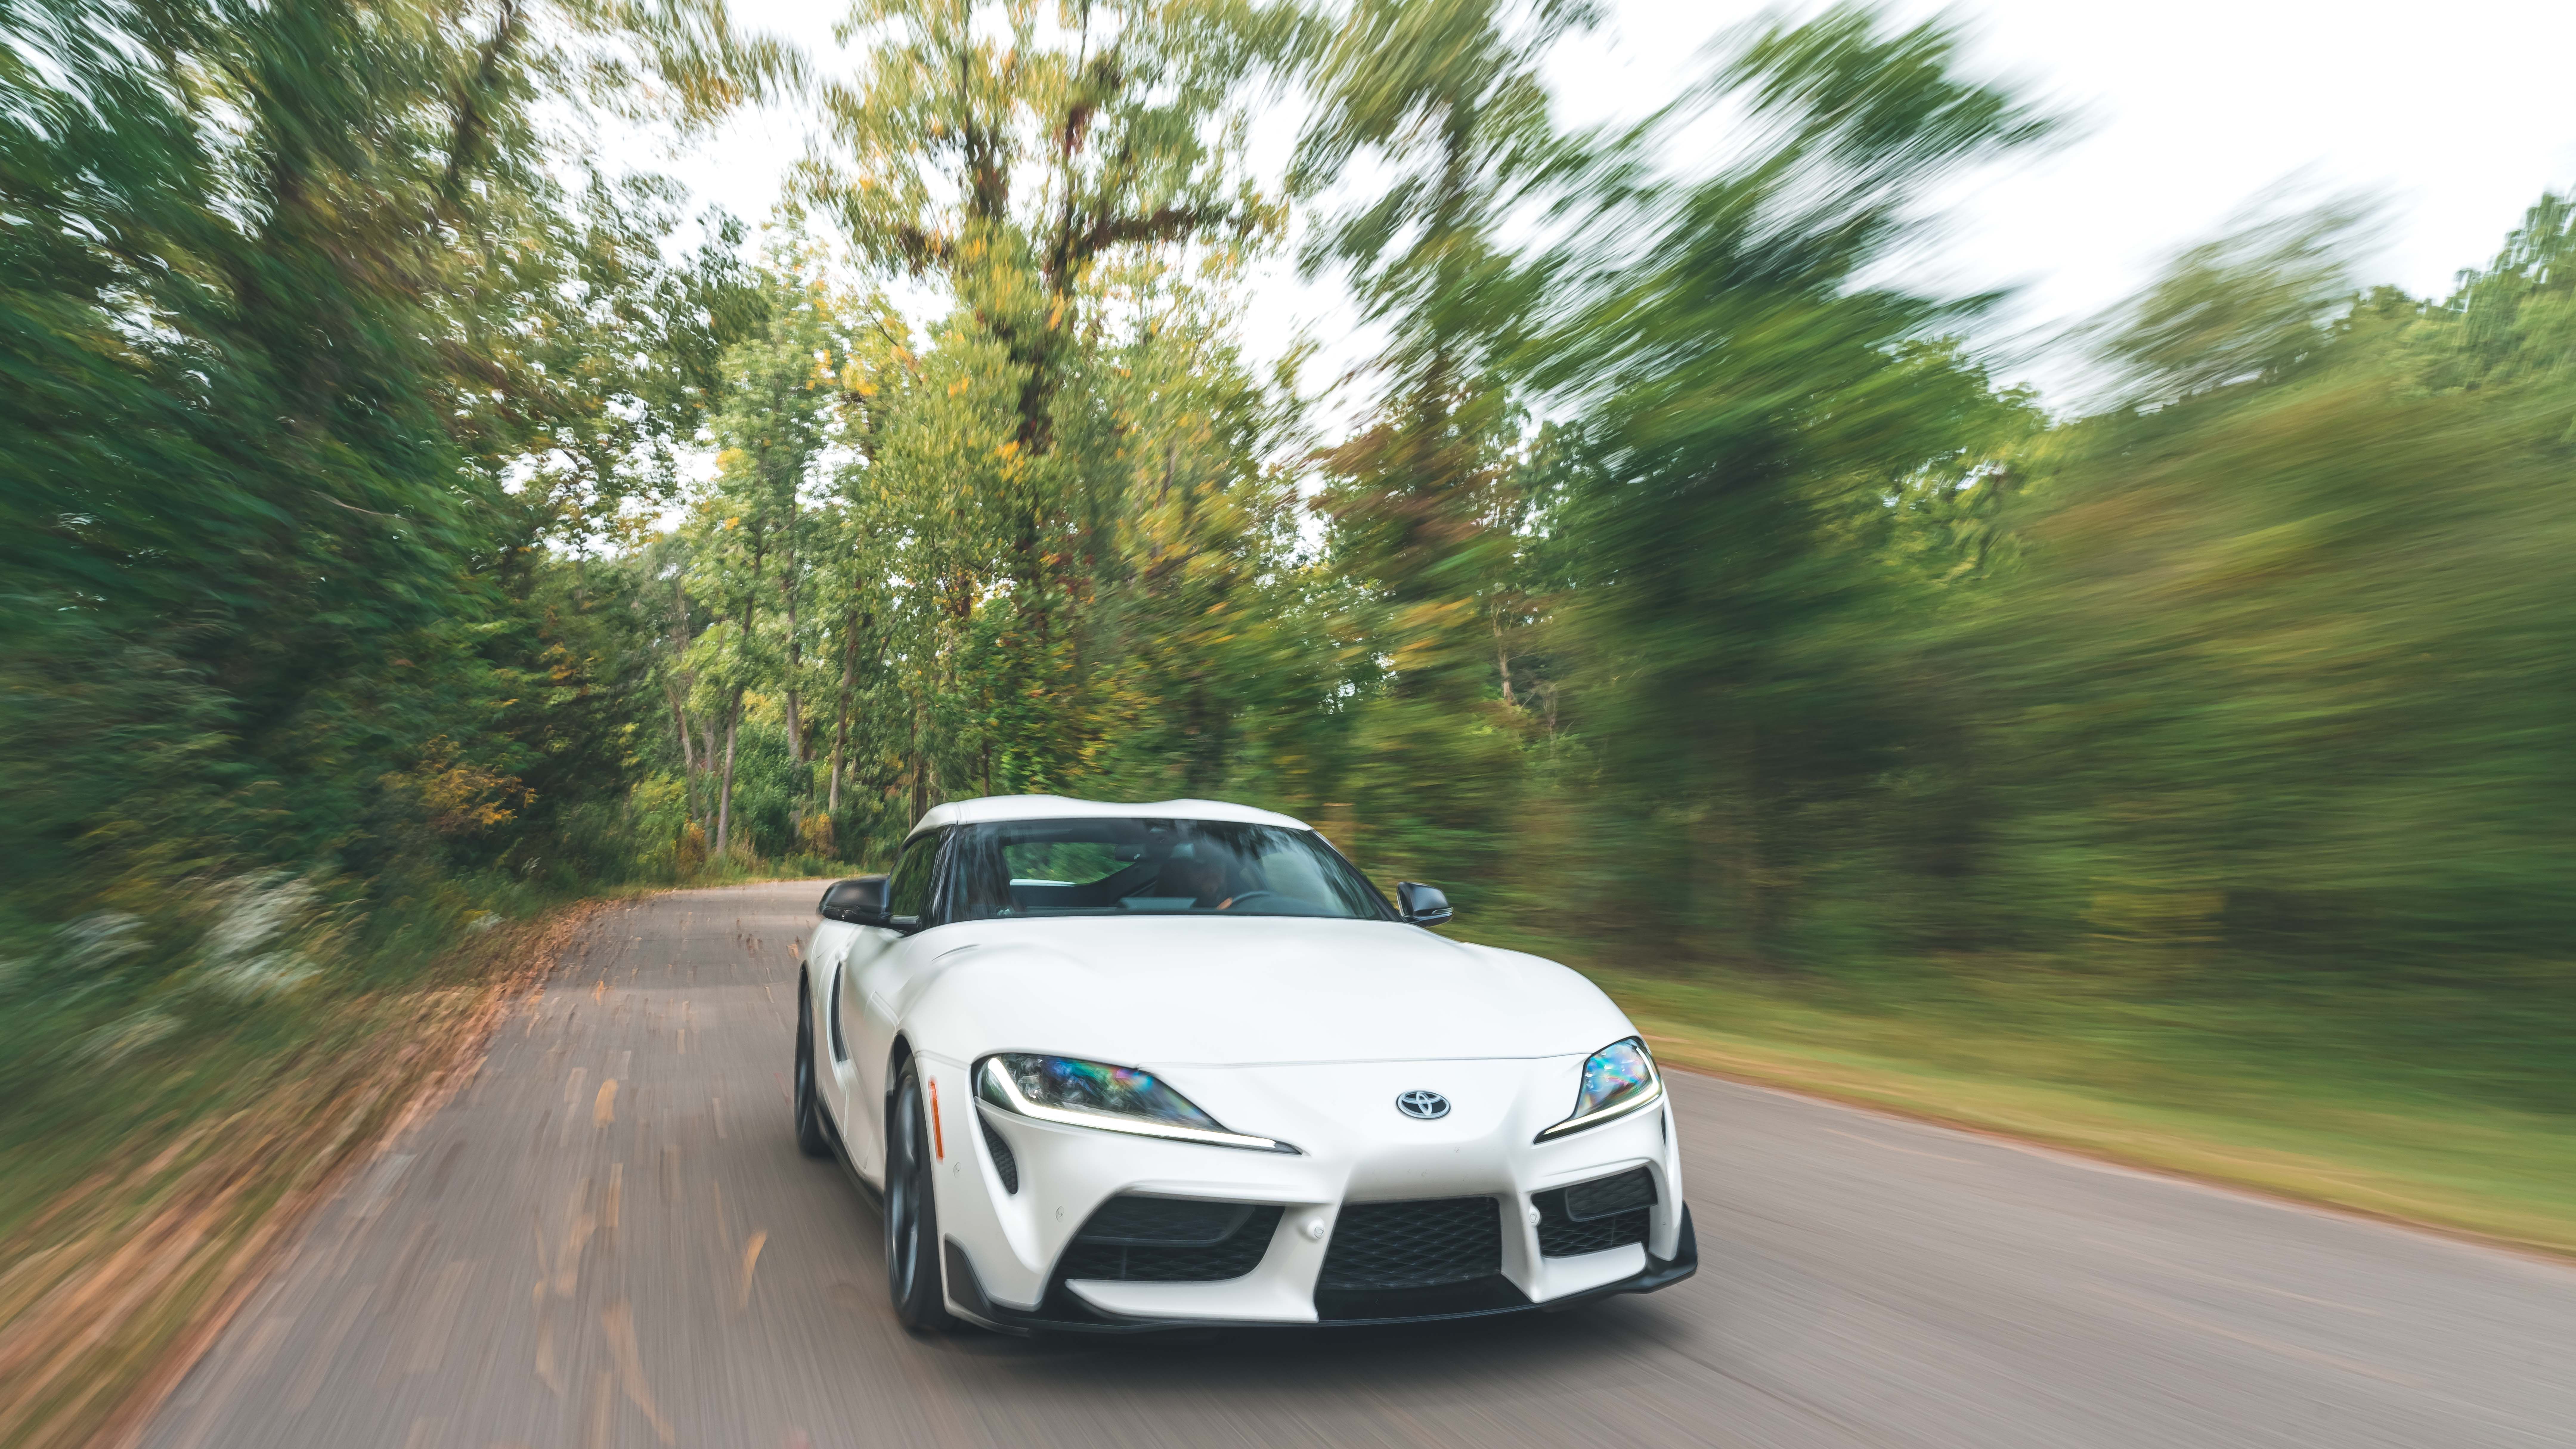 The 2023 Toyota Supra - A Sports Car Experience Like No Other!